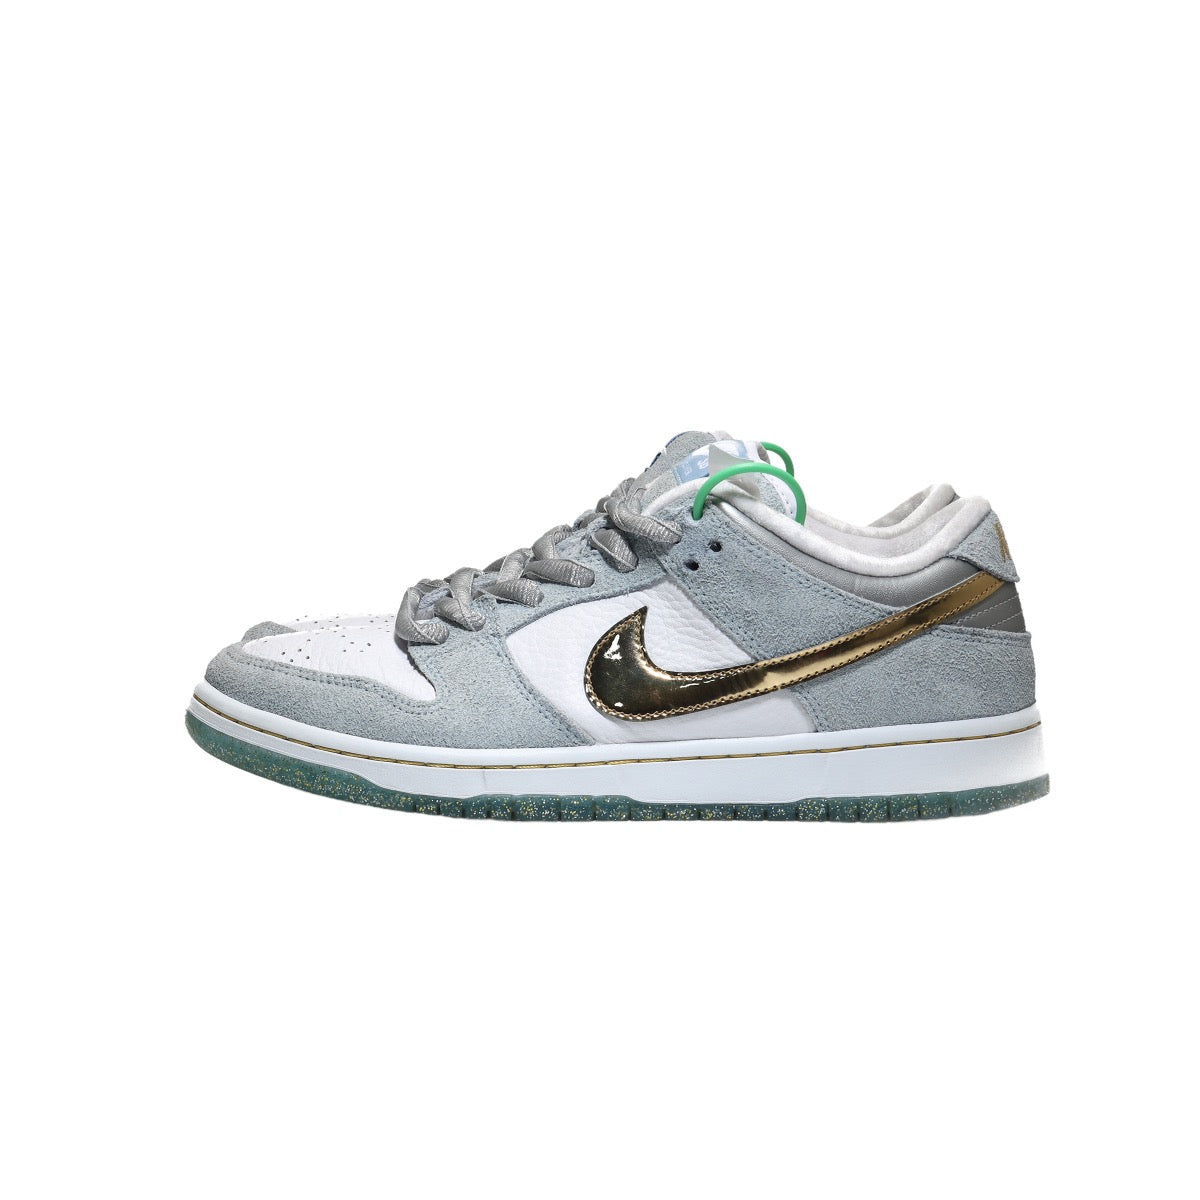 Sean Cliver x Nike SB Dunk Low Pro QS "Holiday Special"